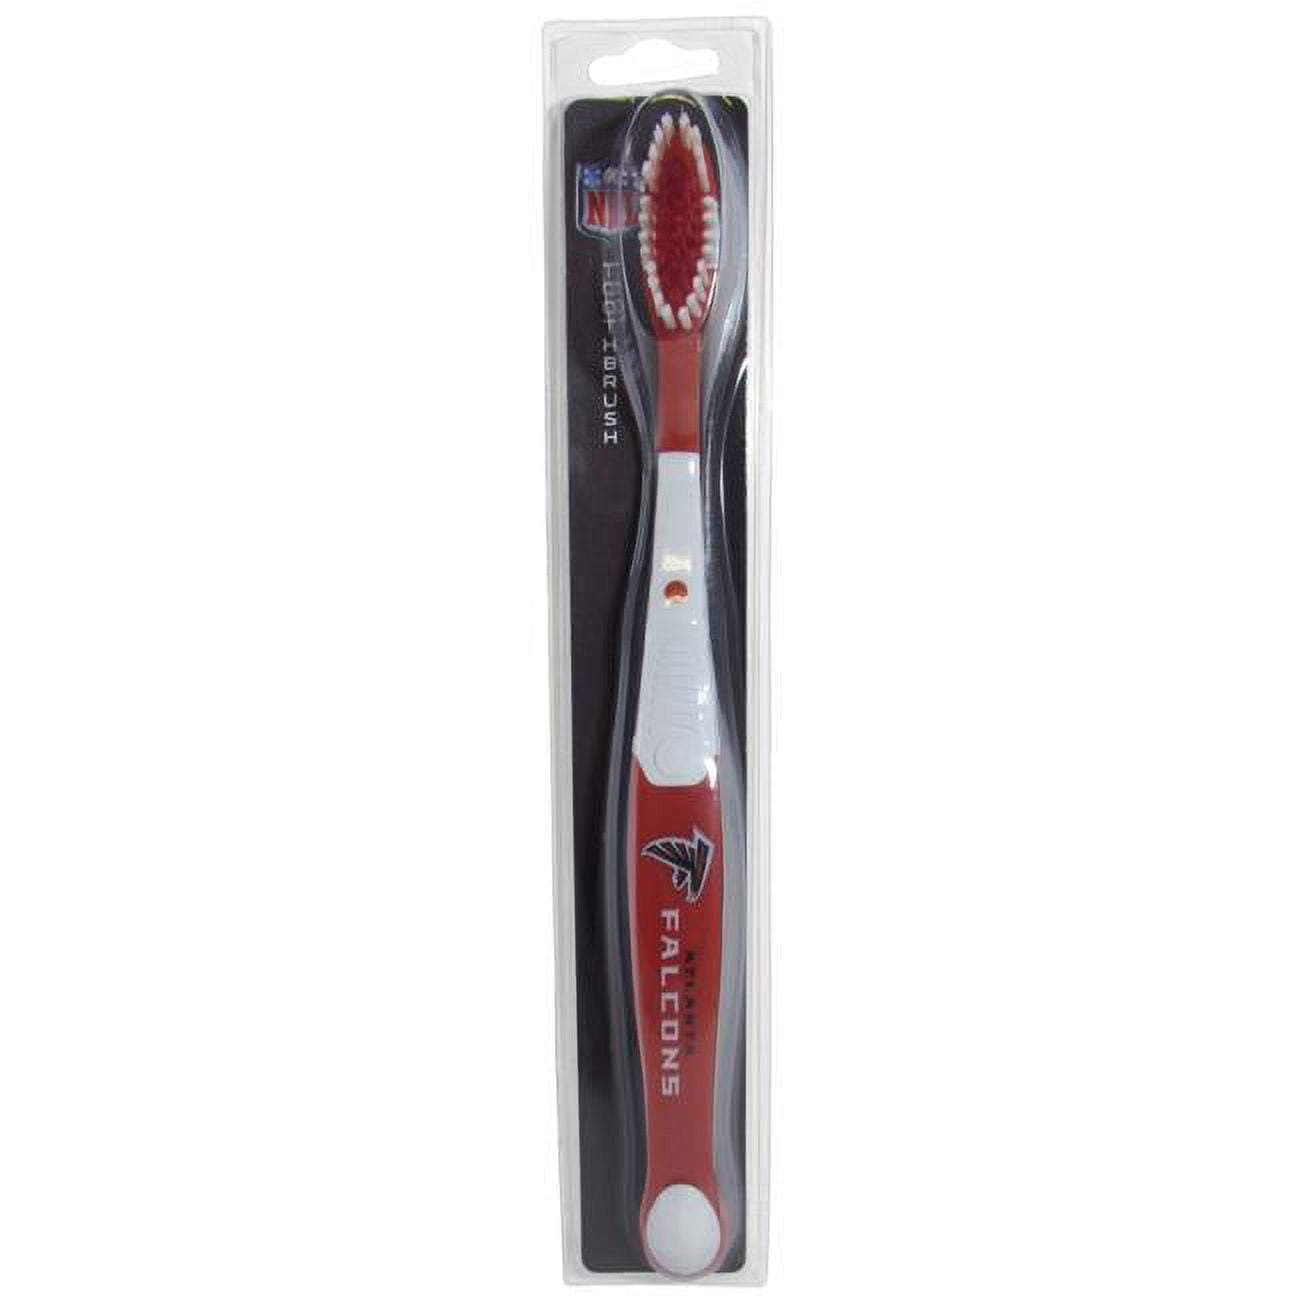 Picture for category NFL Team Toothbrushes & Holders